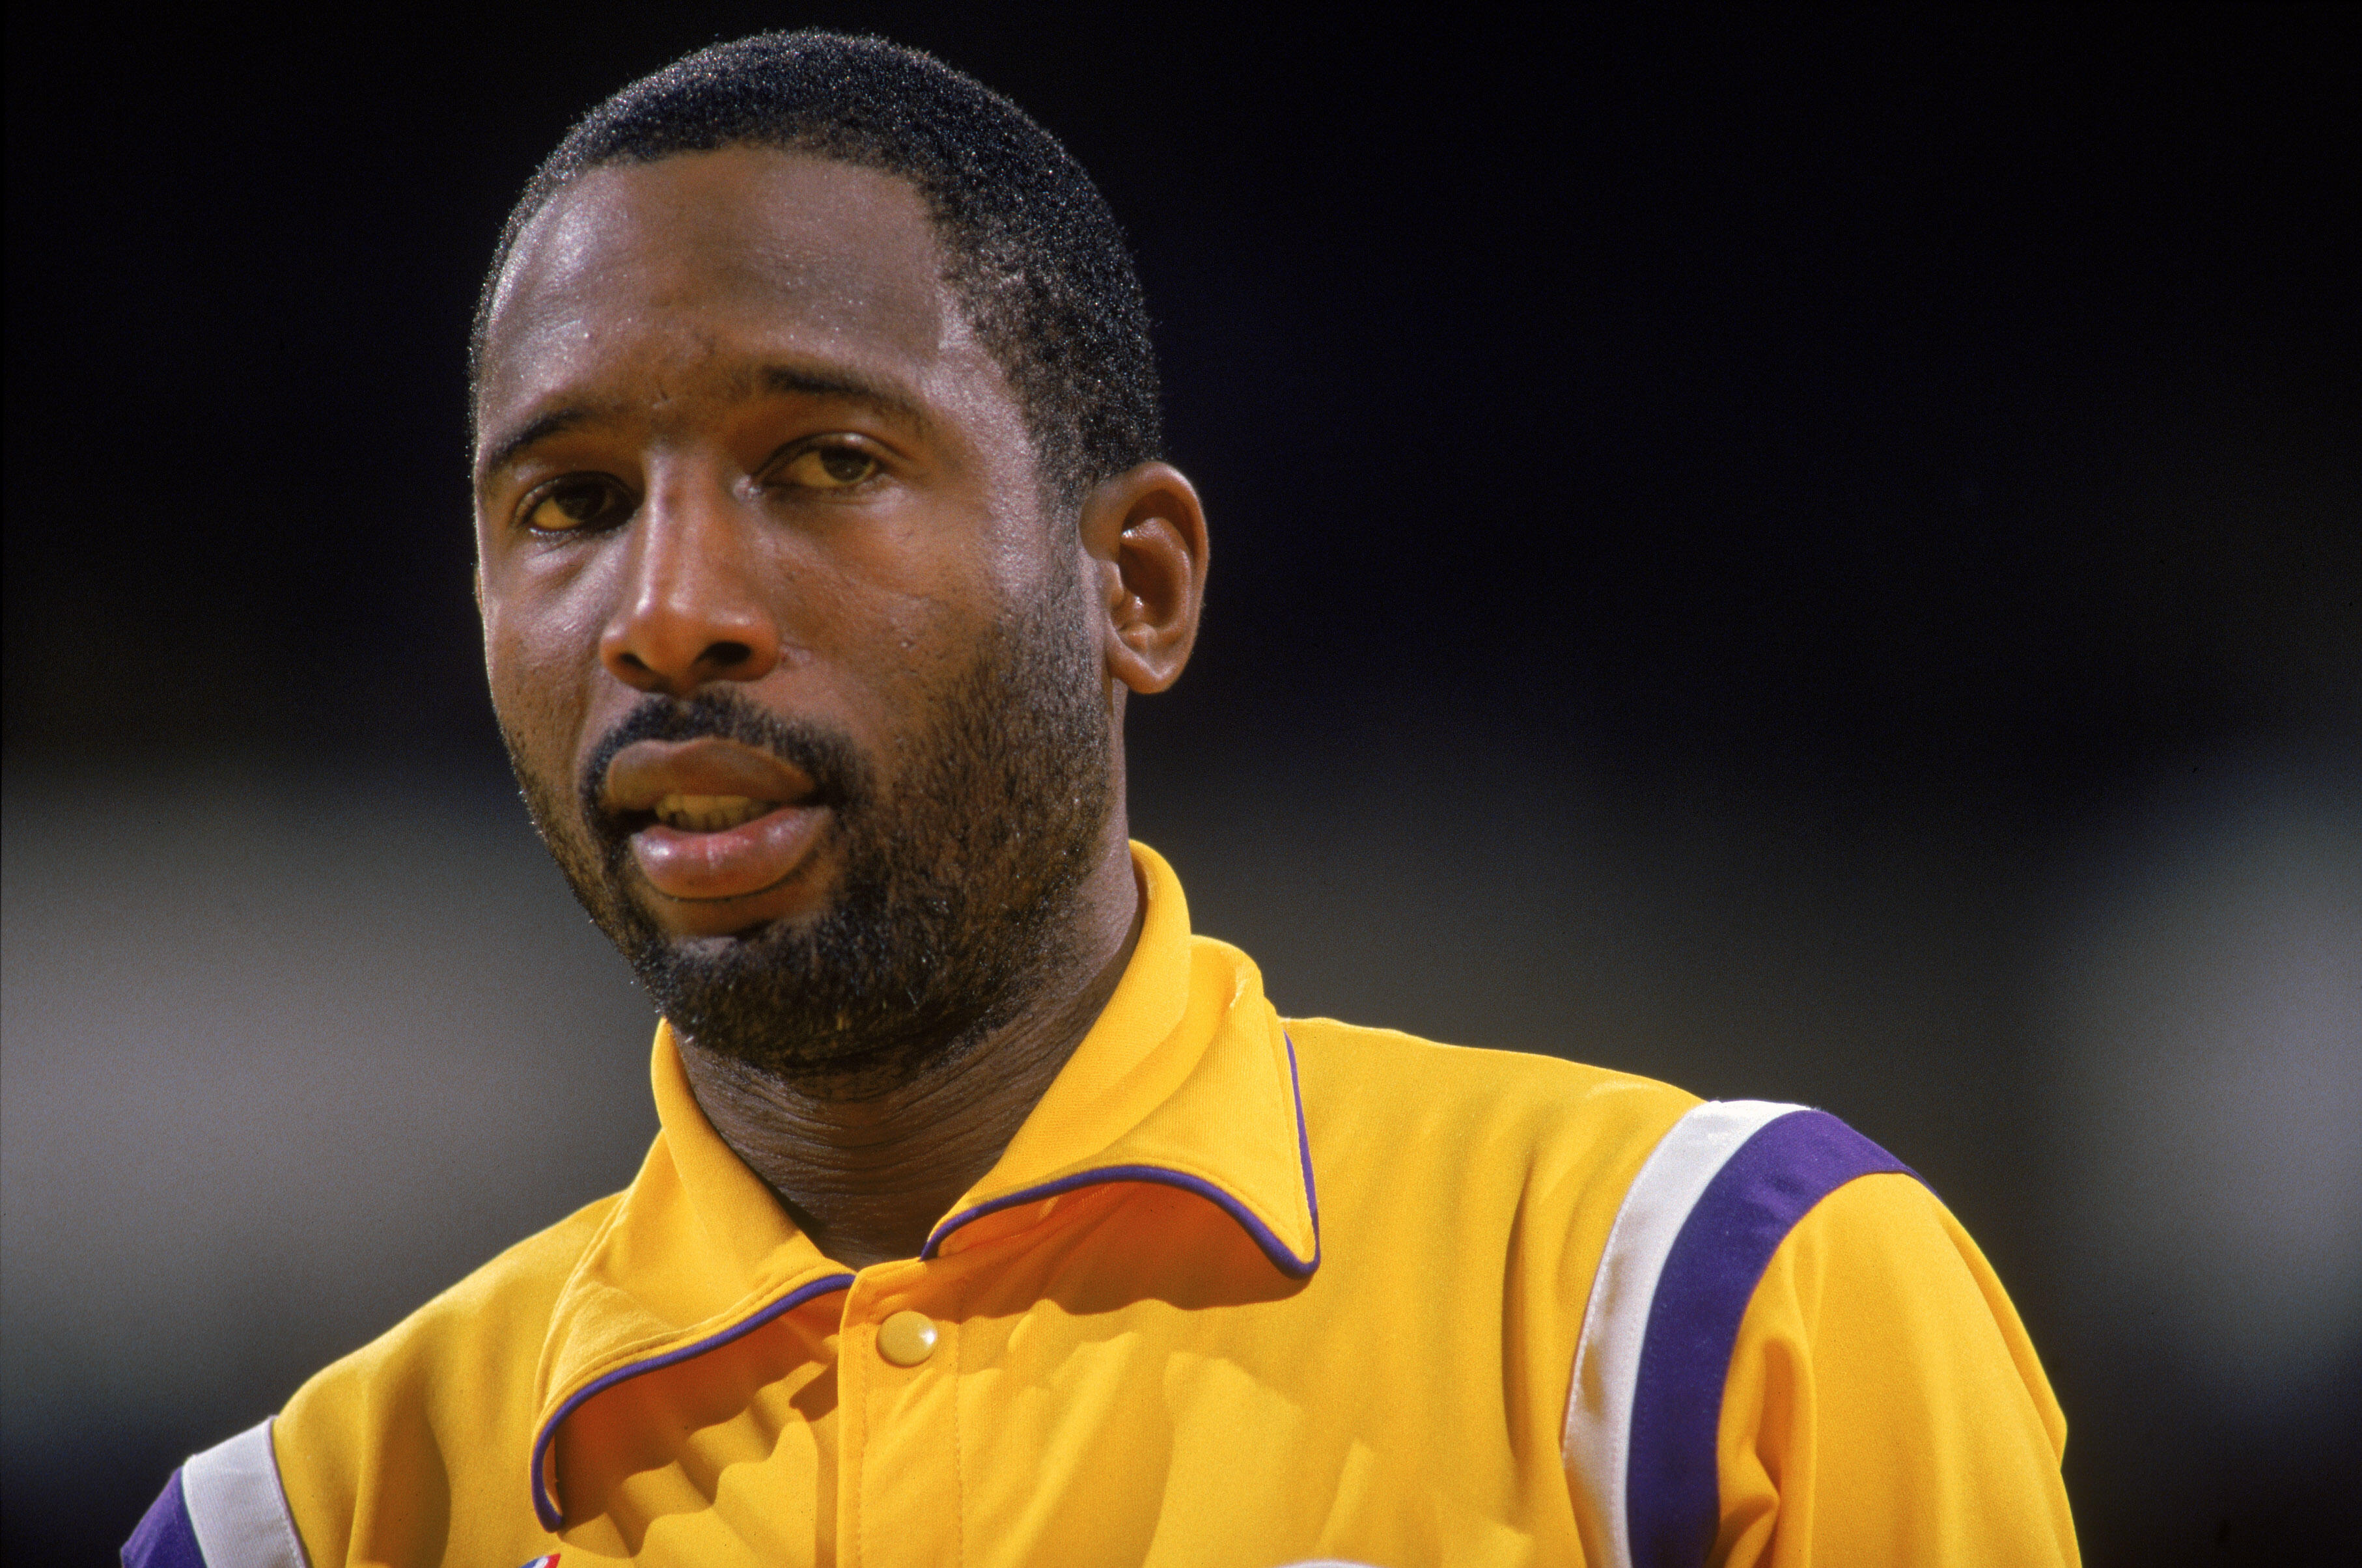 LOS ANGELES - 1987:  James Worthy #42 of the Los Angeles Lakers stands on the court before an NBA game at the Great Western Forum in Los Angeles, California in 1987. (Photo by: Rick Stewart/Getty Images)